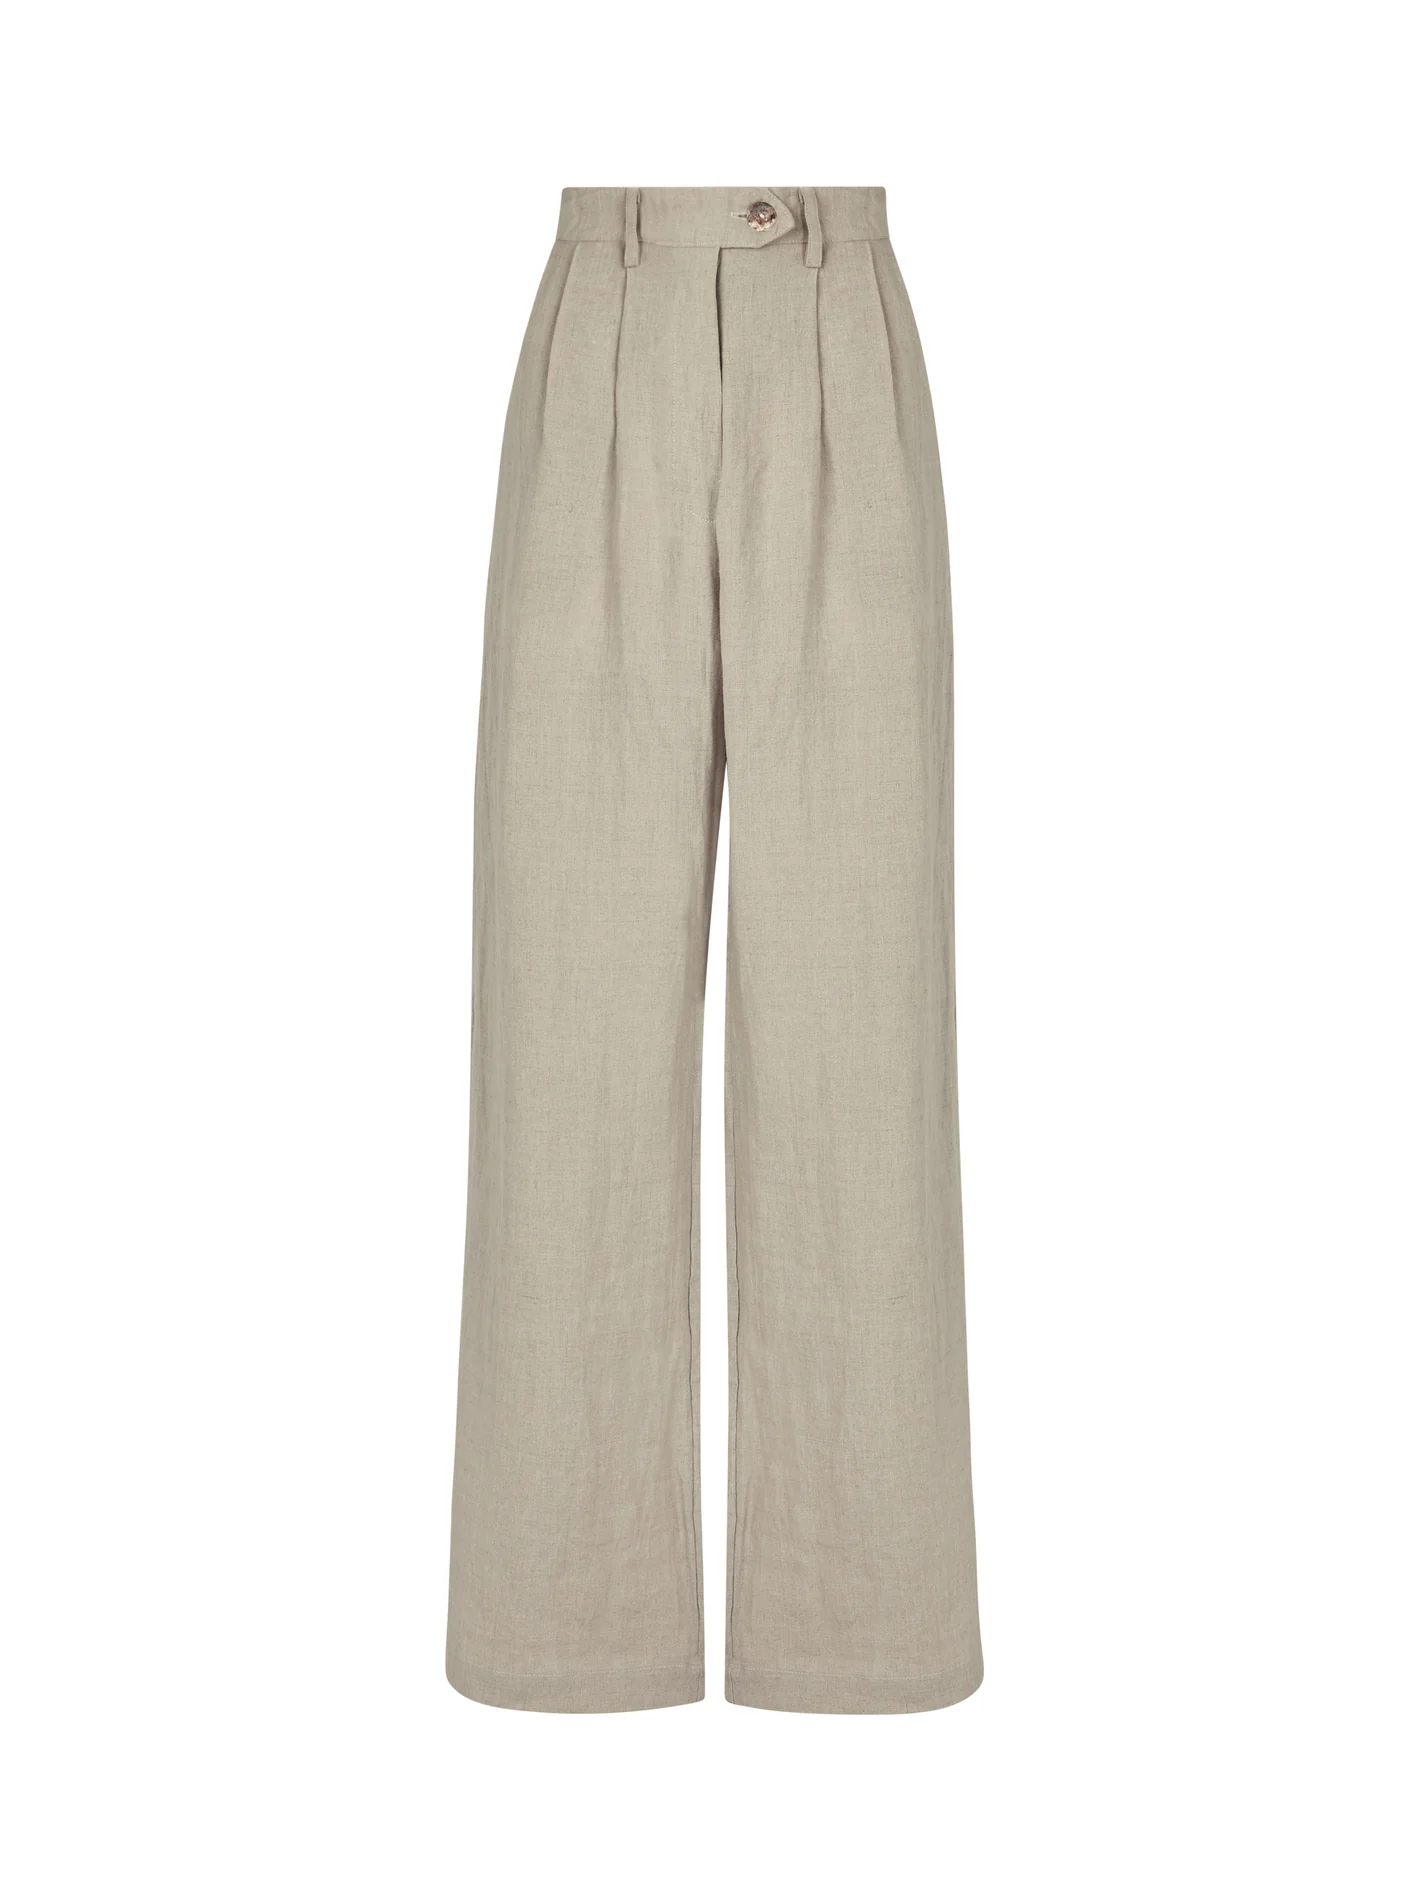 Pure Linen Beige standalone Pant for Woman